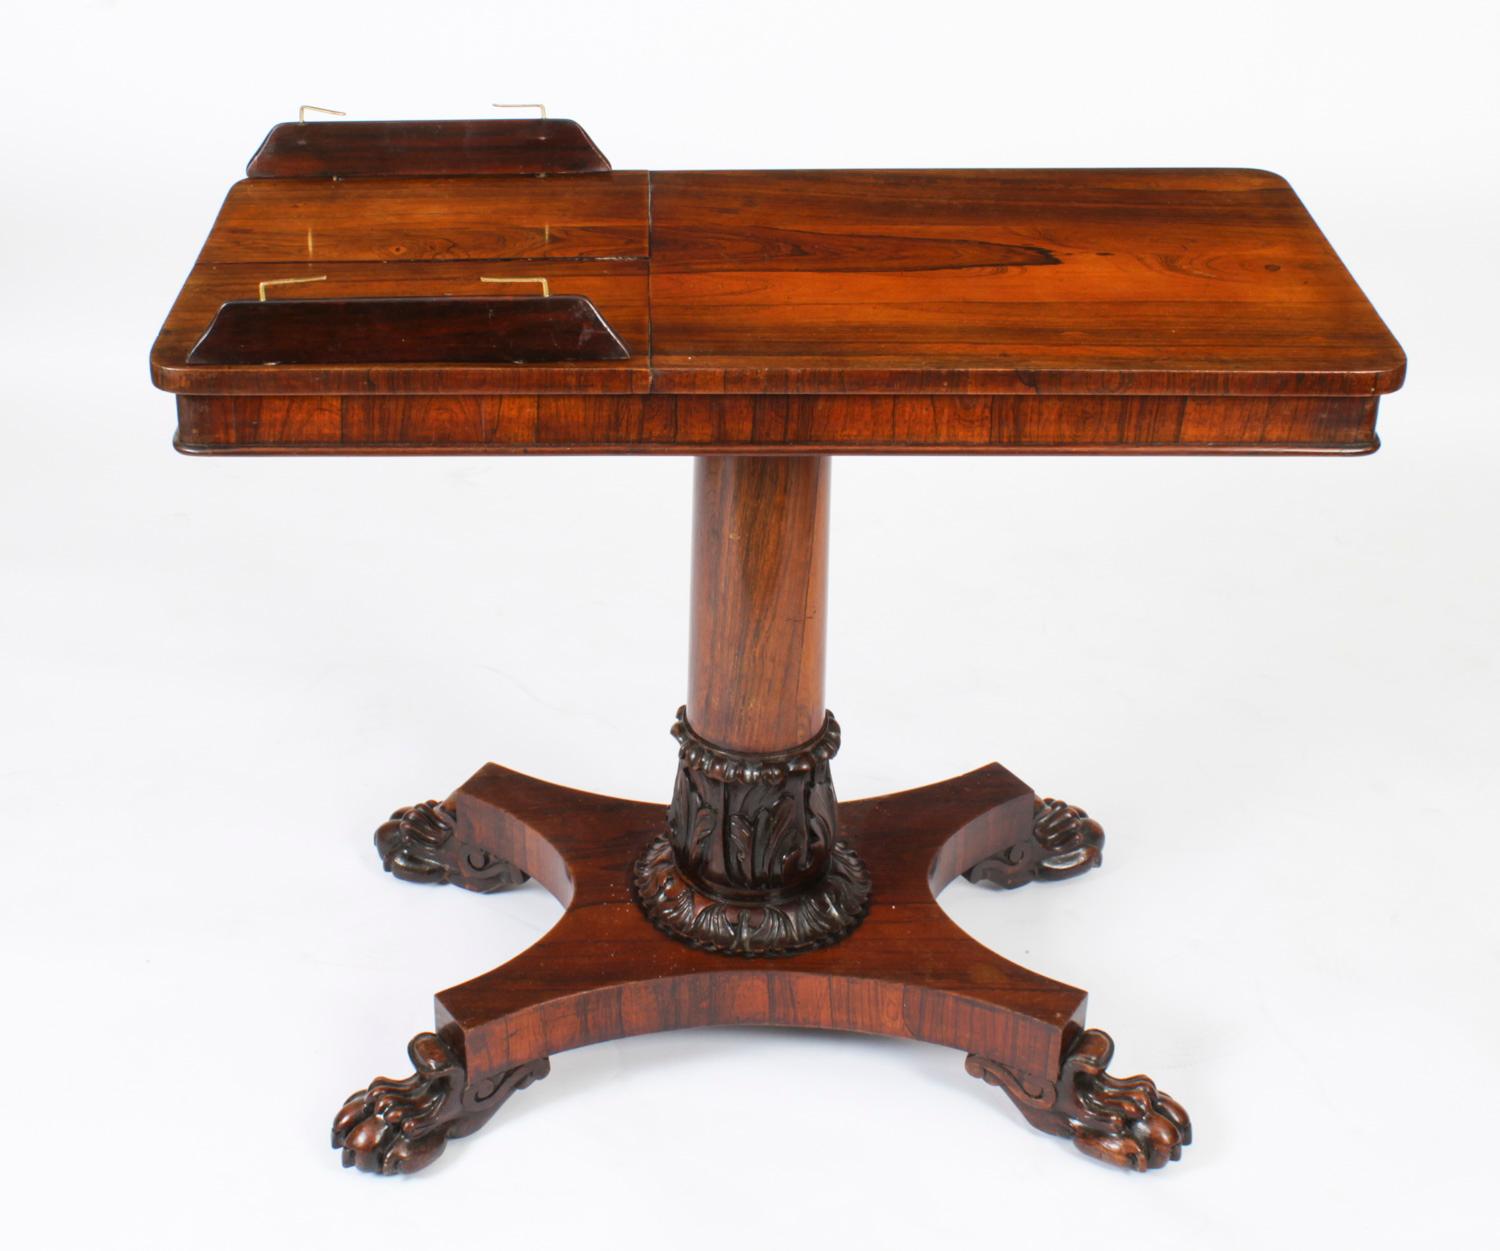 This handsome antique William IV occasional reading table dates from Circa 1830.
 
It has been masterfully crafted in Gonçalo Alves, has a top which can be raised at different angles to display your favourite books or magazines and is also ideal